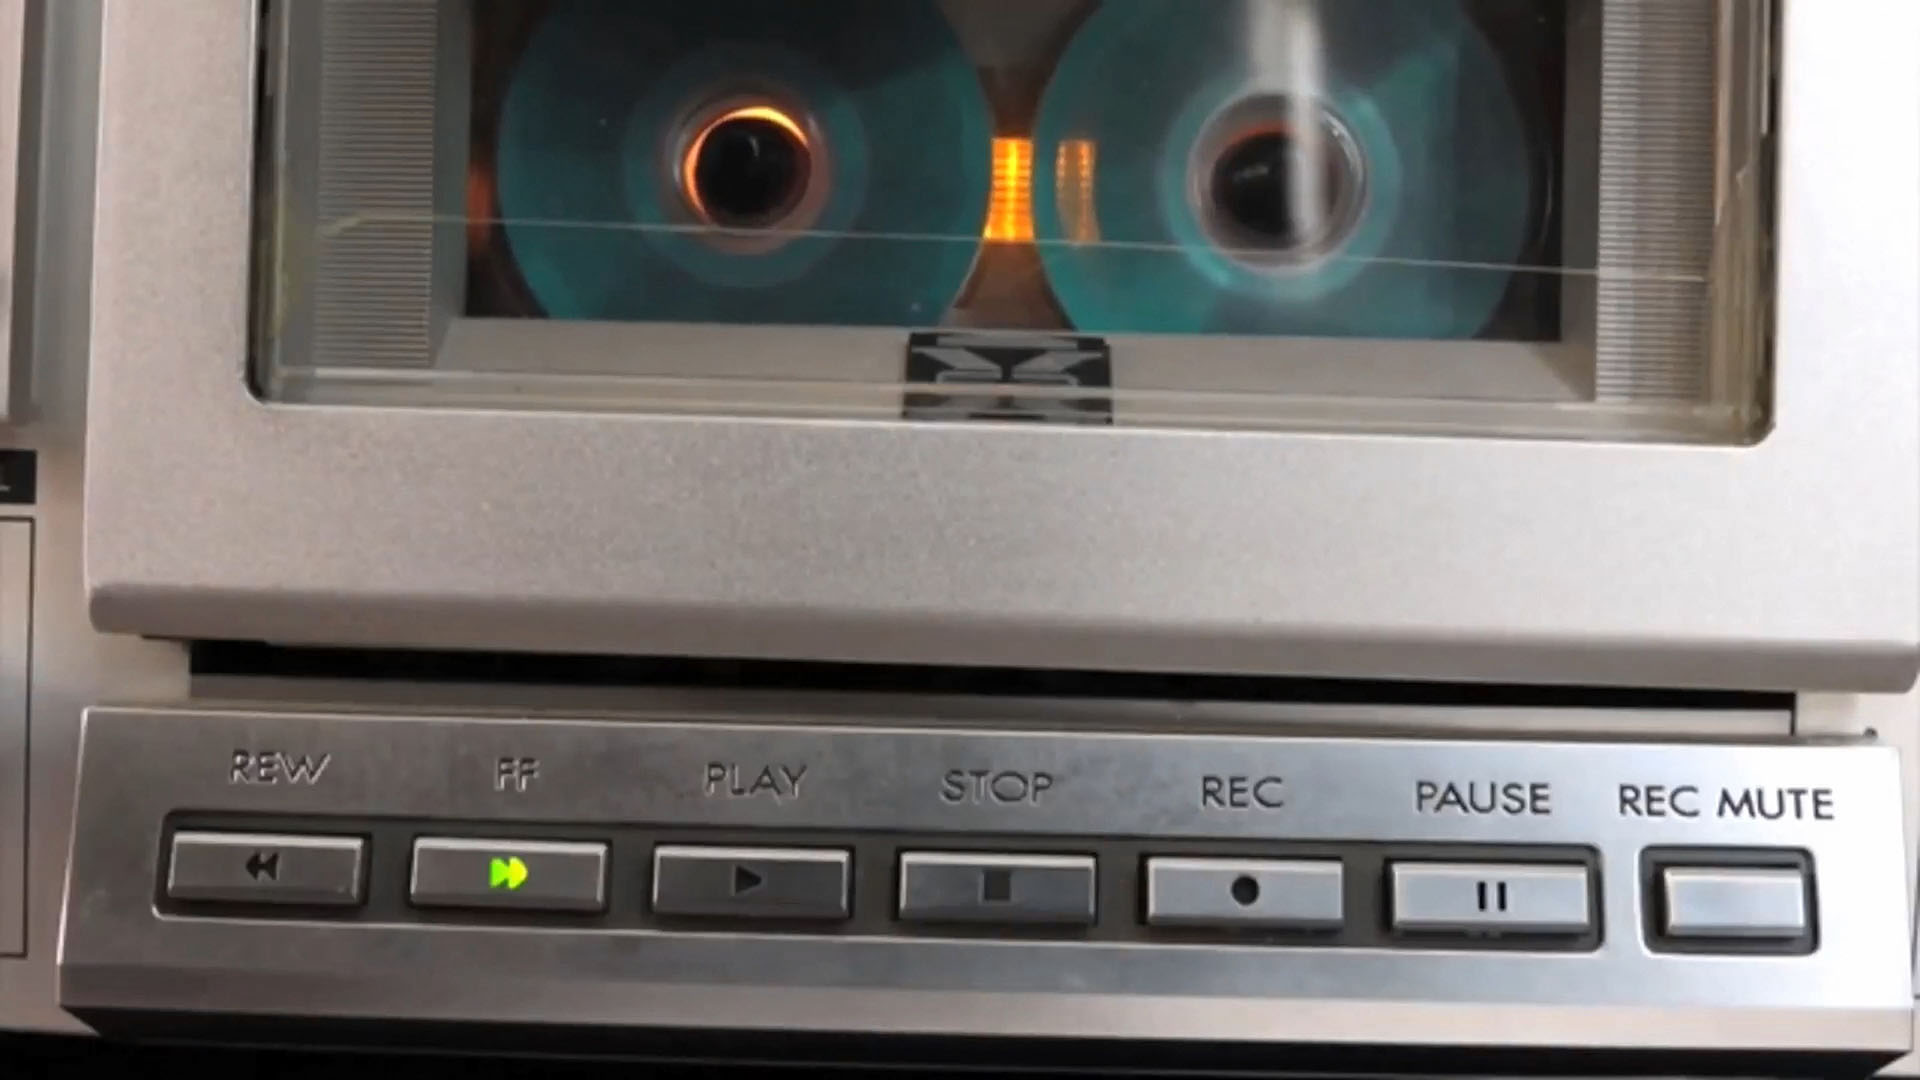 The First VCR